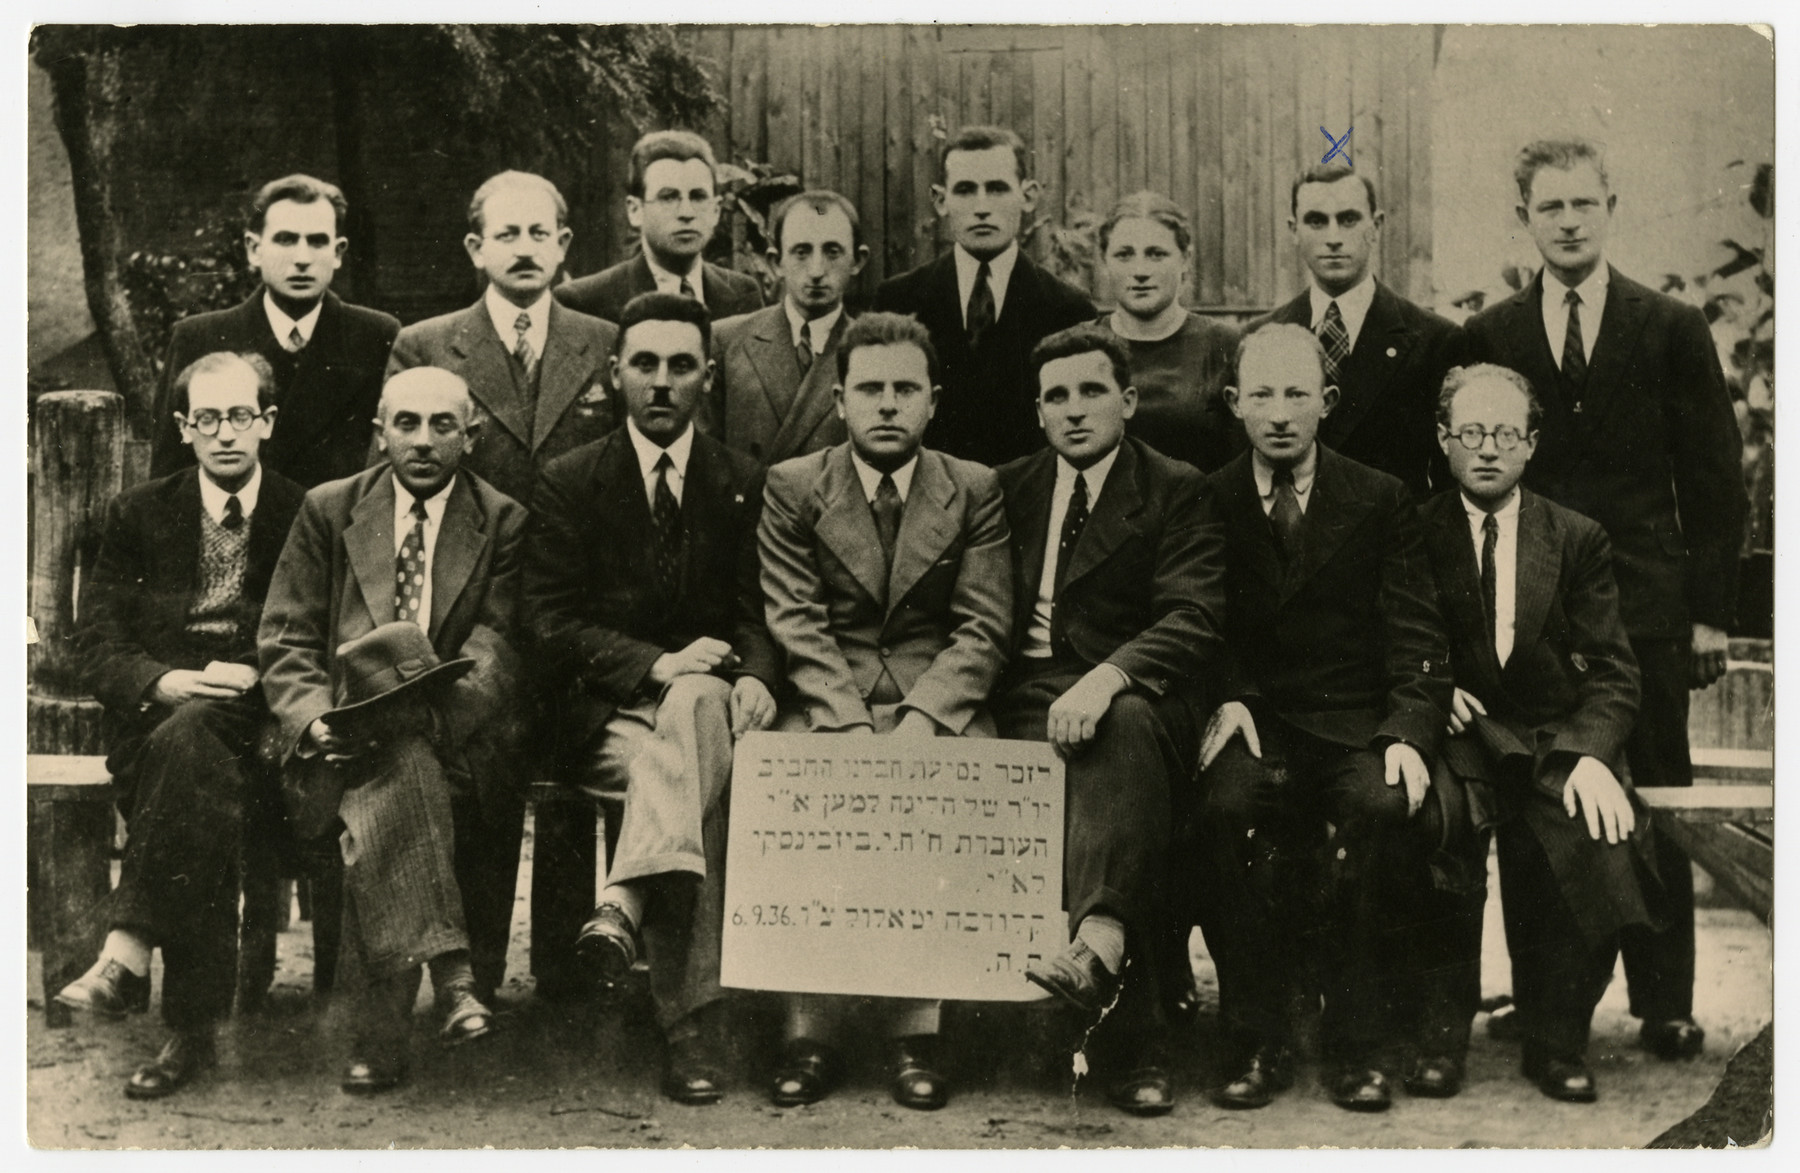 Members of a social organization in Klodawa gather to say farewell to a member who is about to emigrate.

Moshe Burdowski (brother of the donor) is standing second from the right.